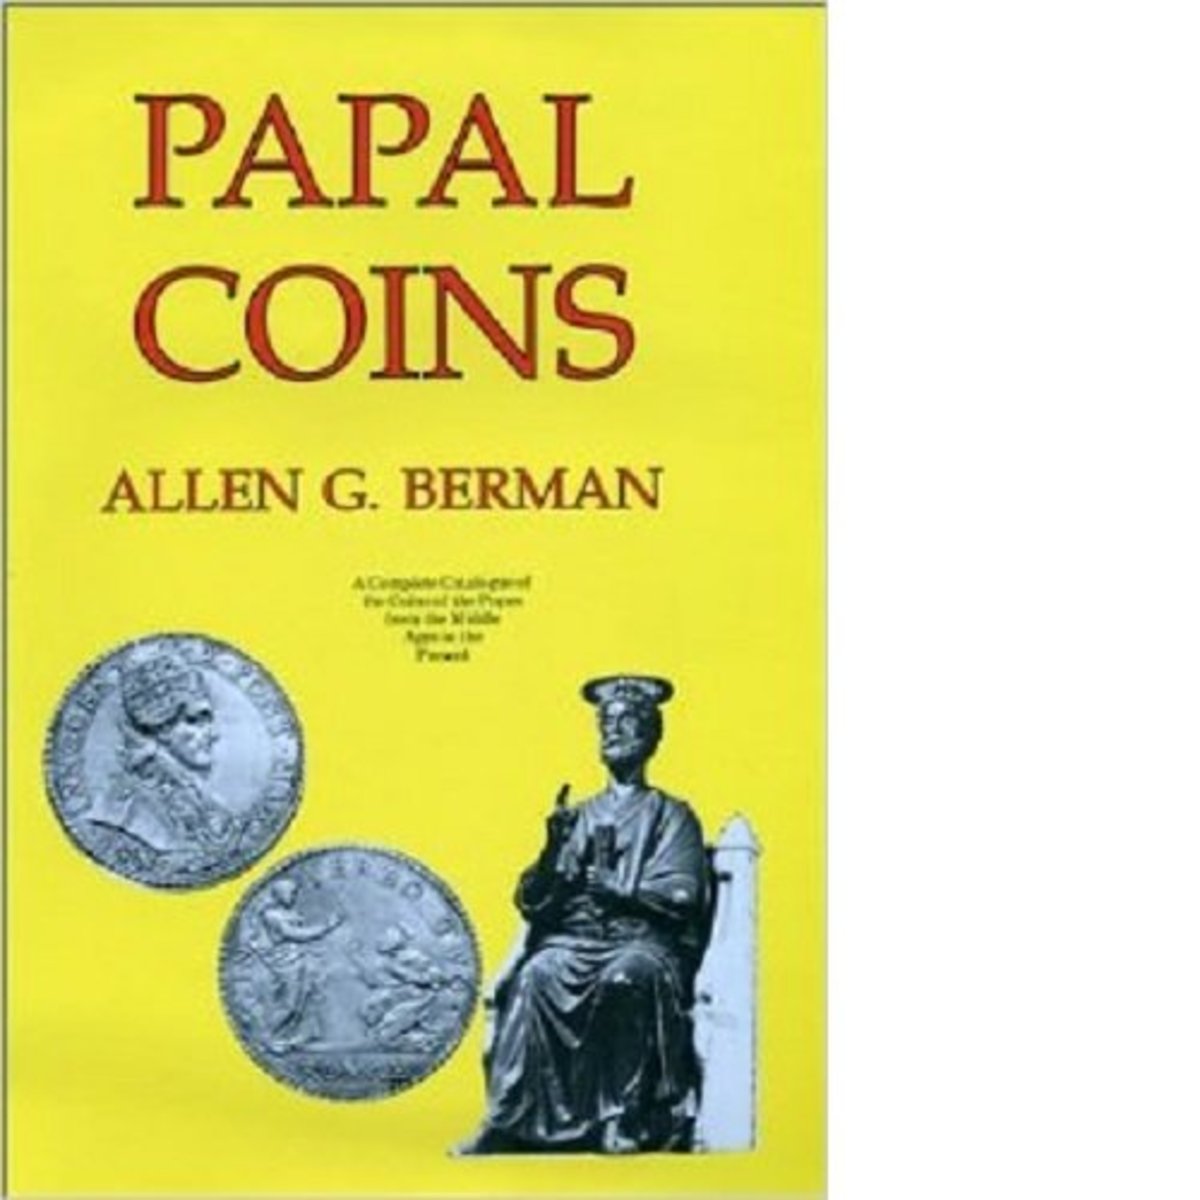 Coins with a Spiritual Significance